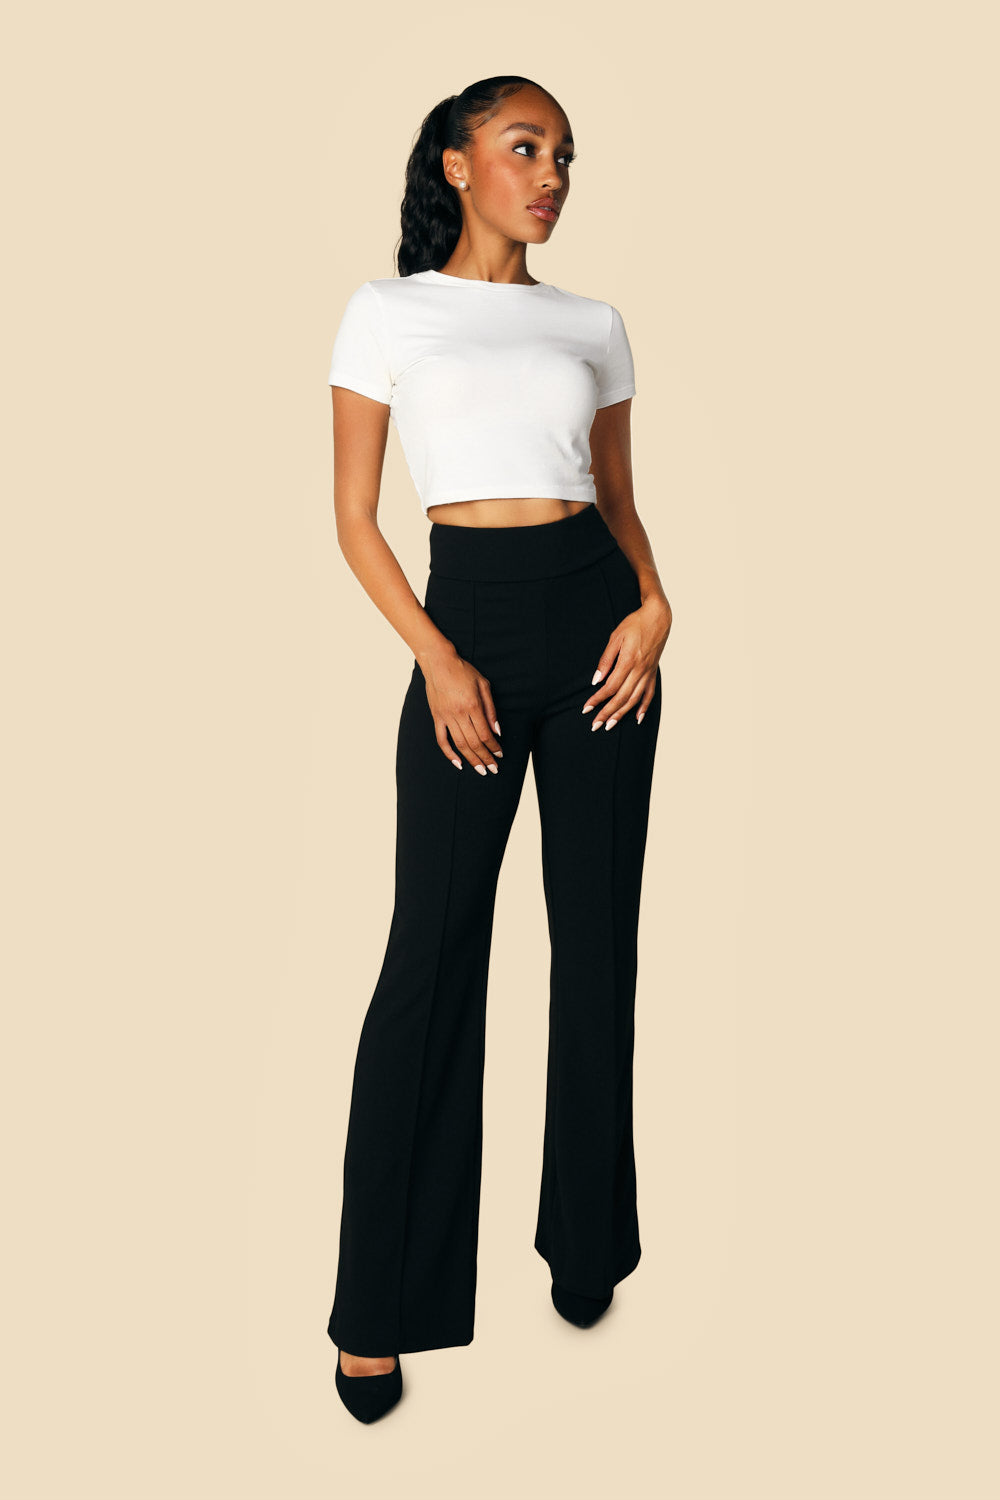 Chiclily Women's Wide Leg Pants with Pockets Lightweight High Waisted  Adjustable Tie Knot Loose Trousers Flowy Summer Beach Lounge Pants, US Size  2XL in Black - Walmart.com